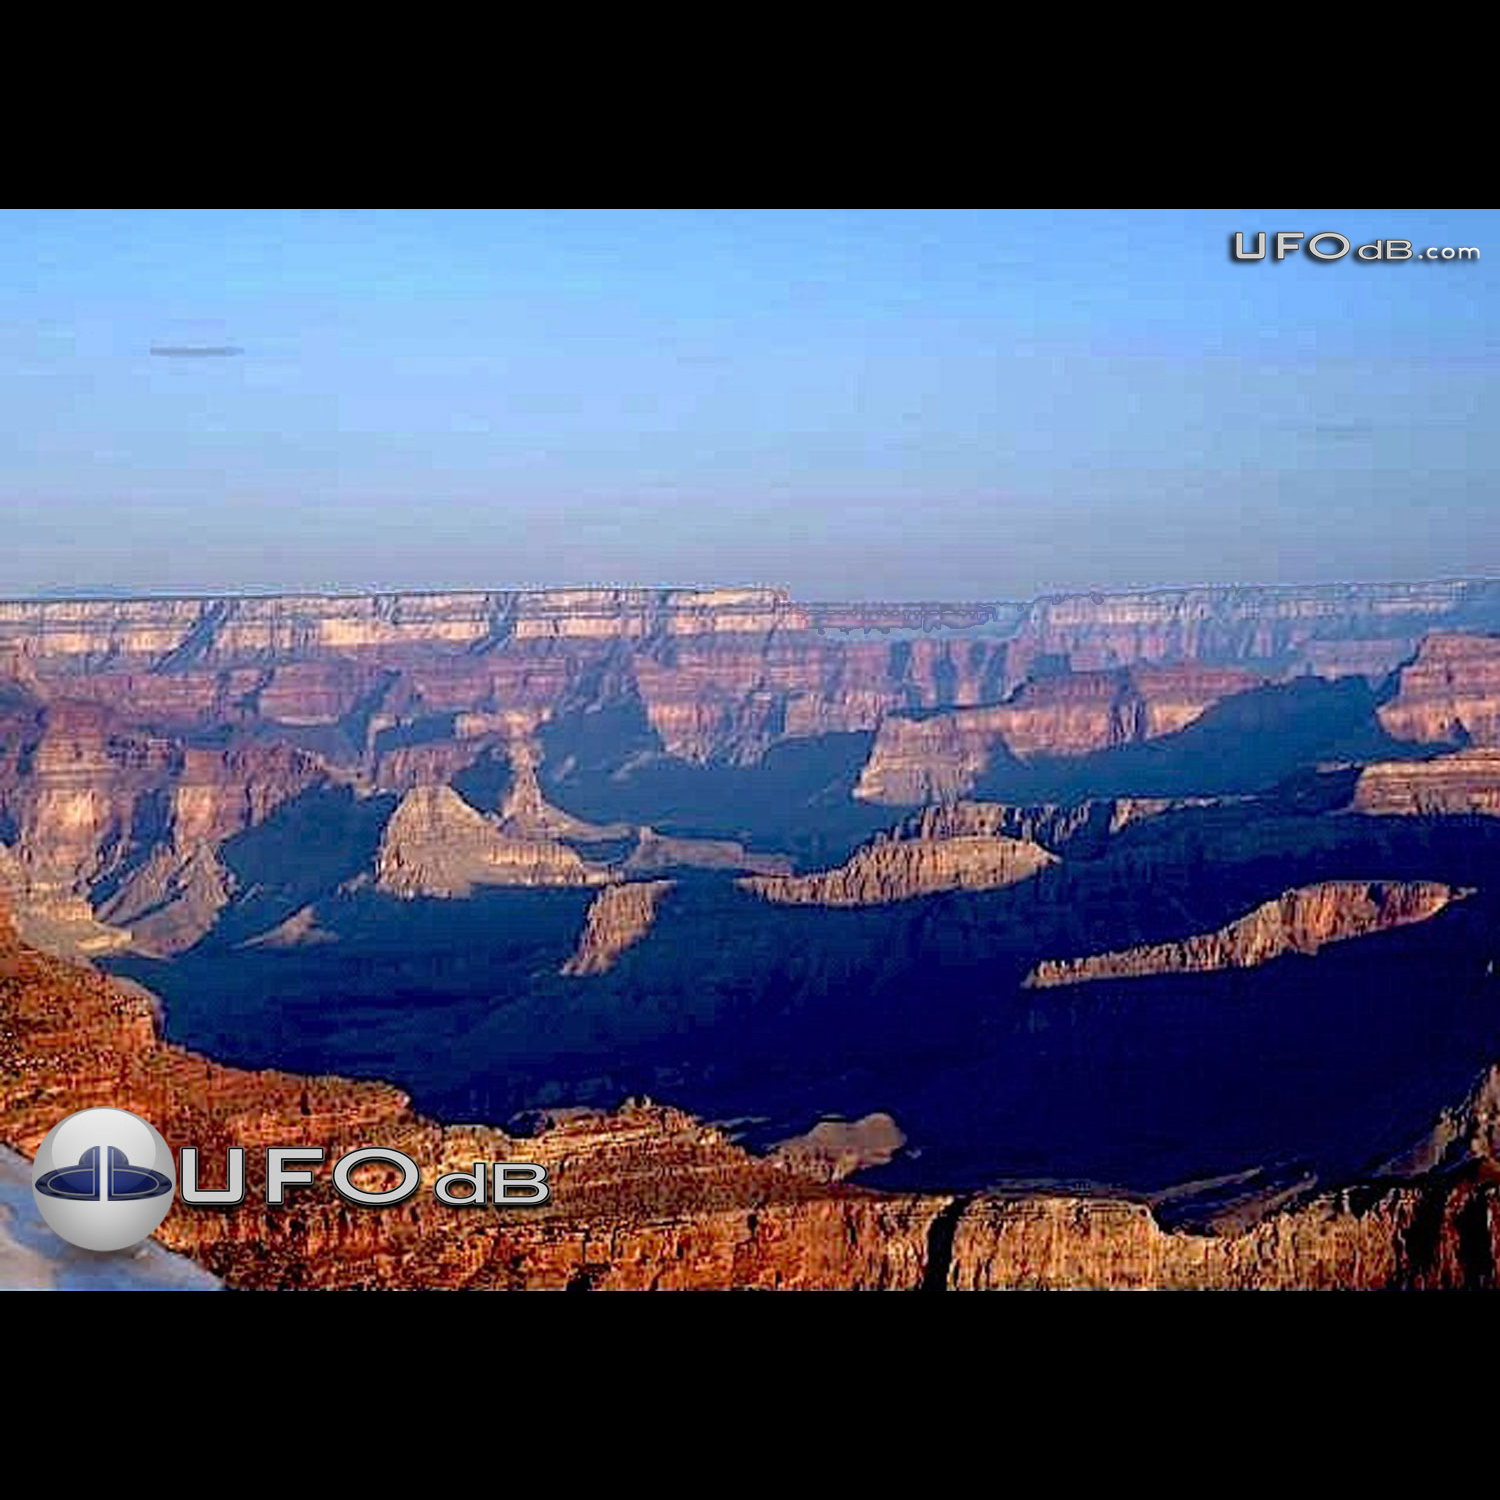 Yavapai Point Cam capture UFO picture | Grand Canyon USA | May 24 2011 UFO Picture #323-1